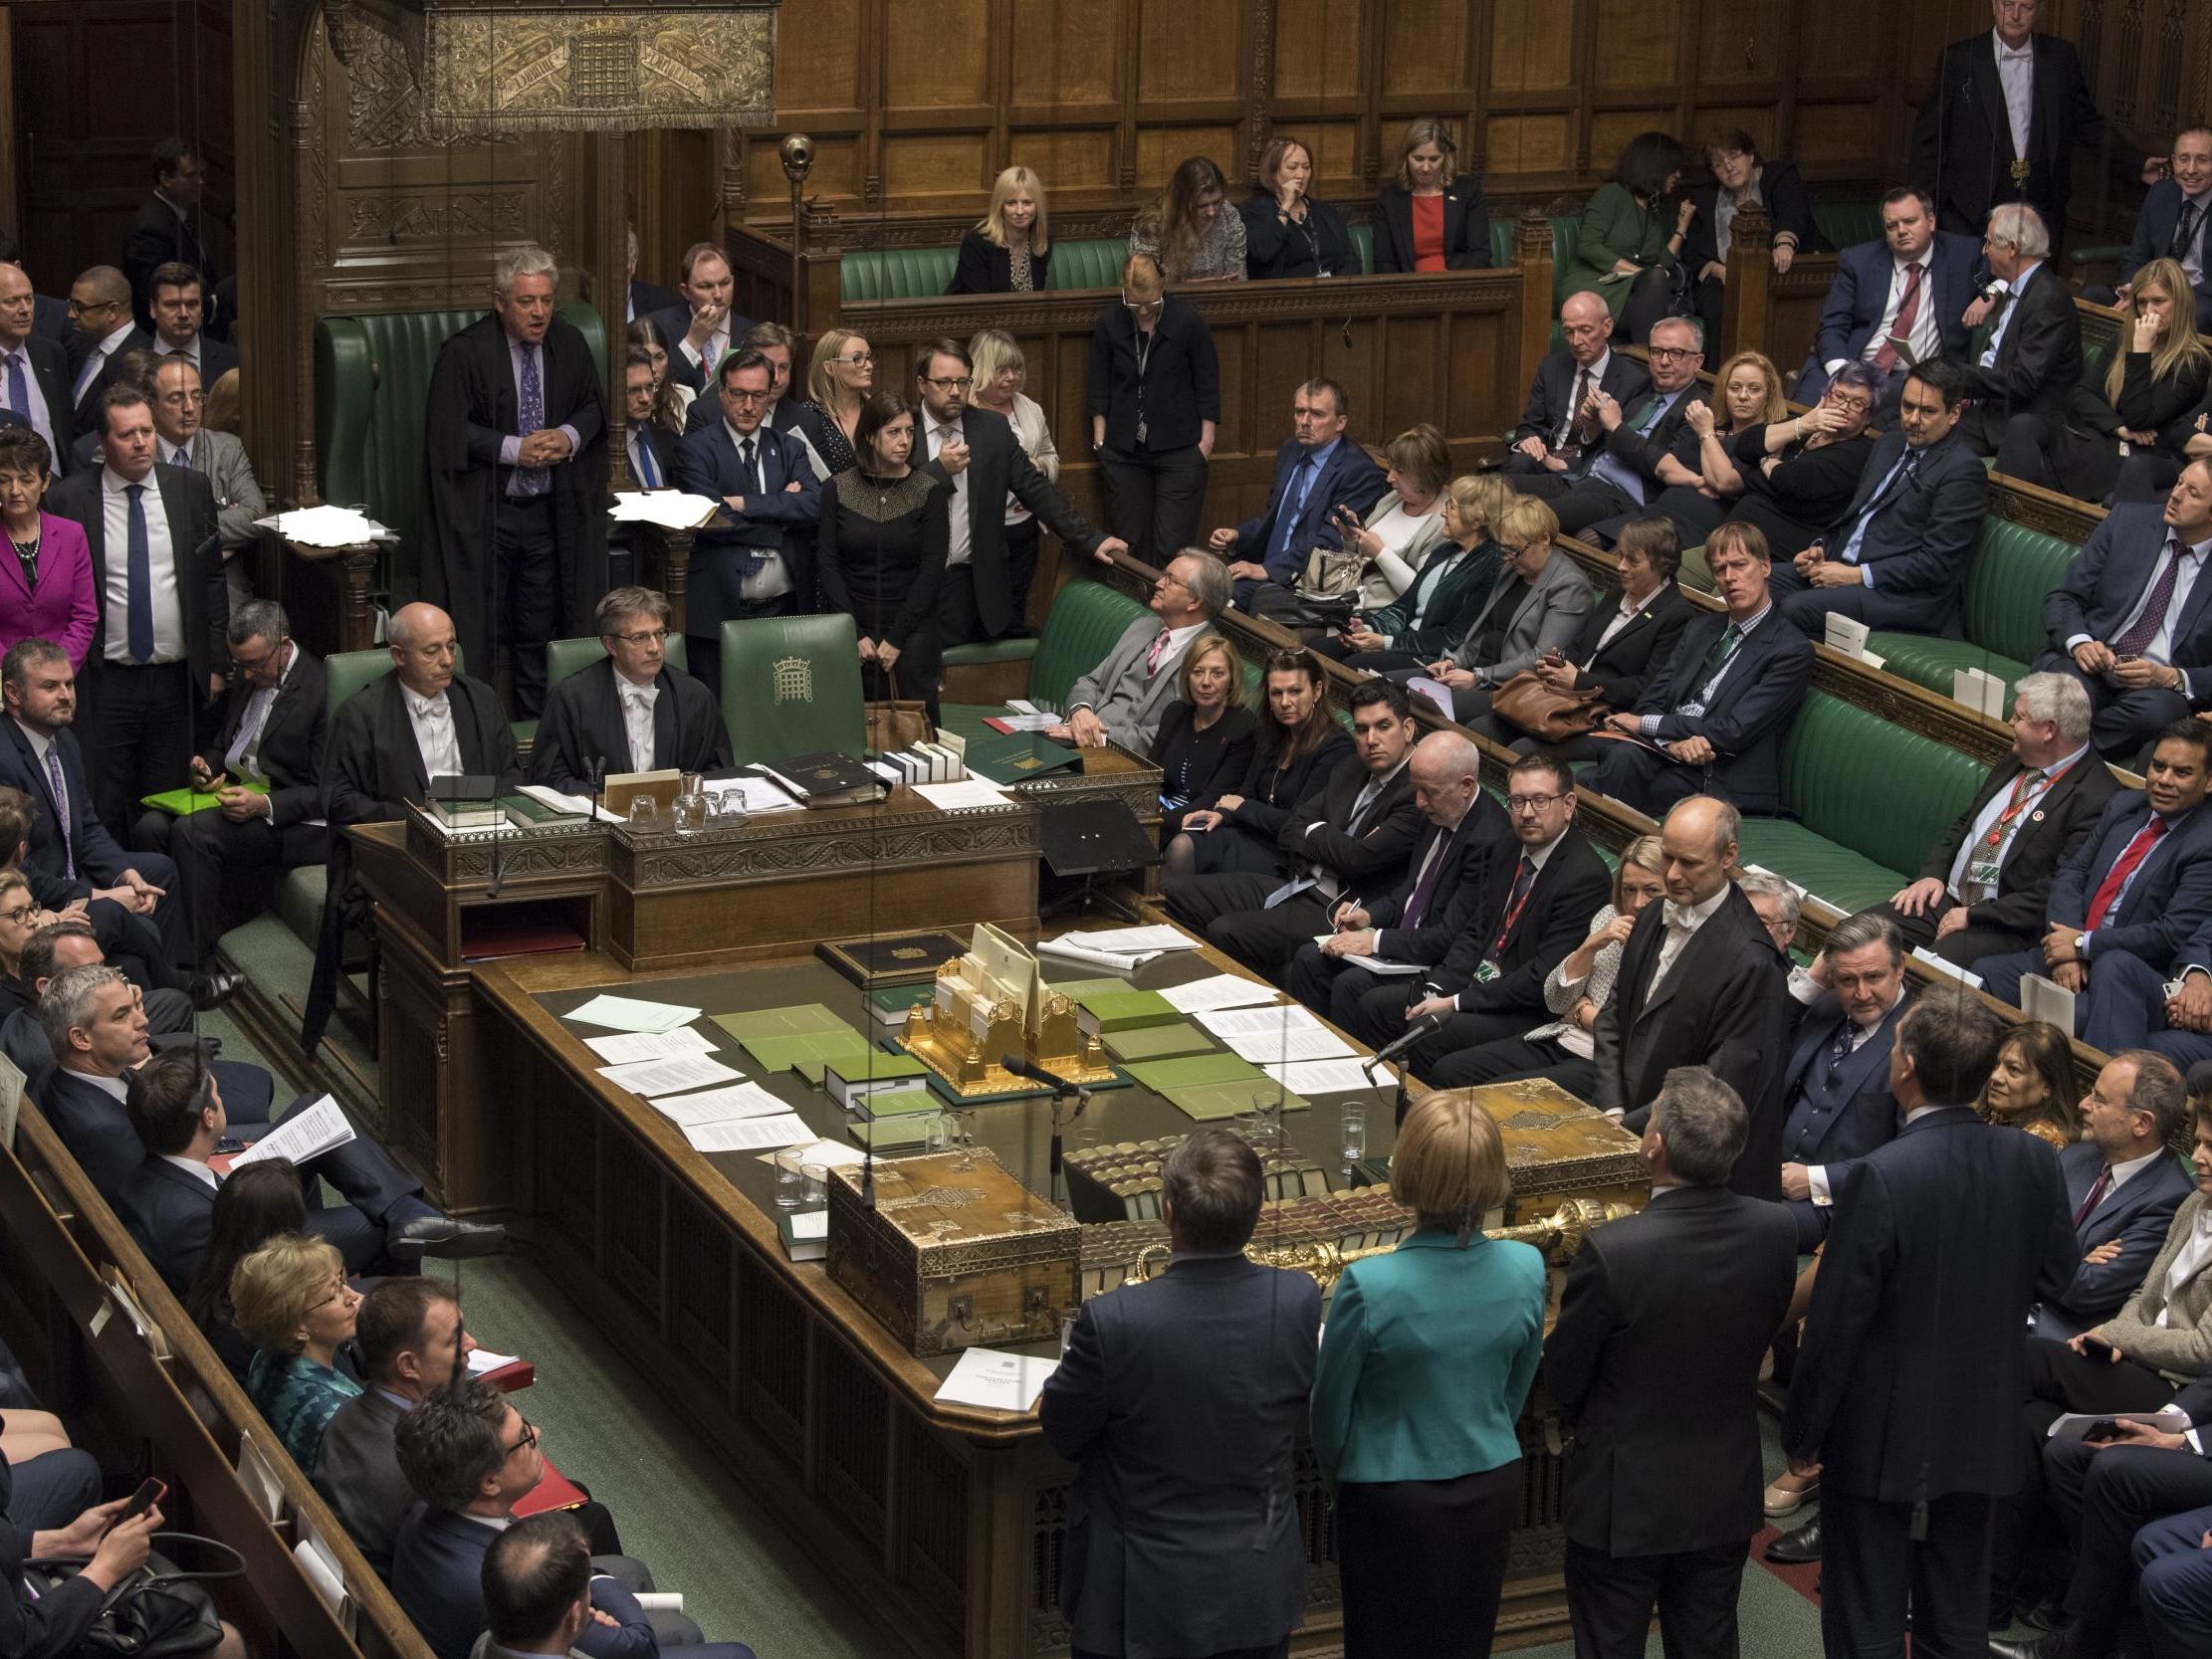 With seven days to avoid no-deal Brexit, the House of Commons actually flooded